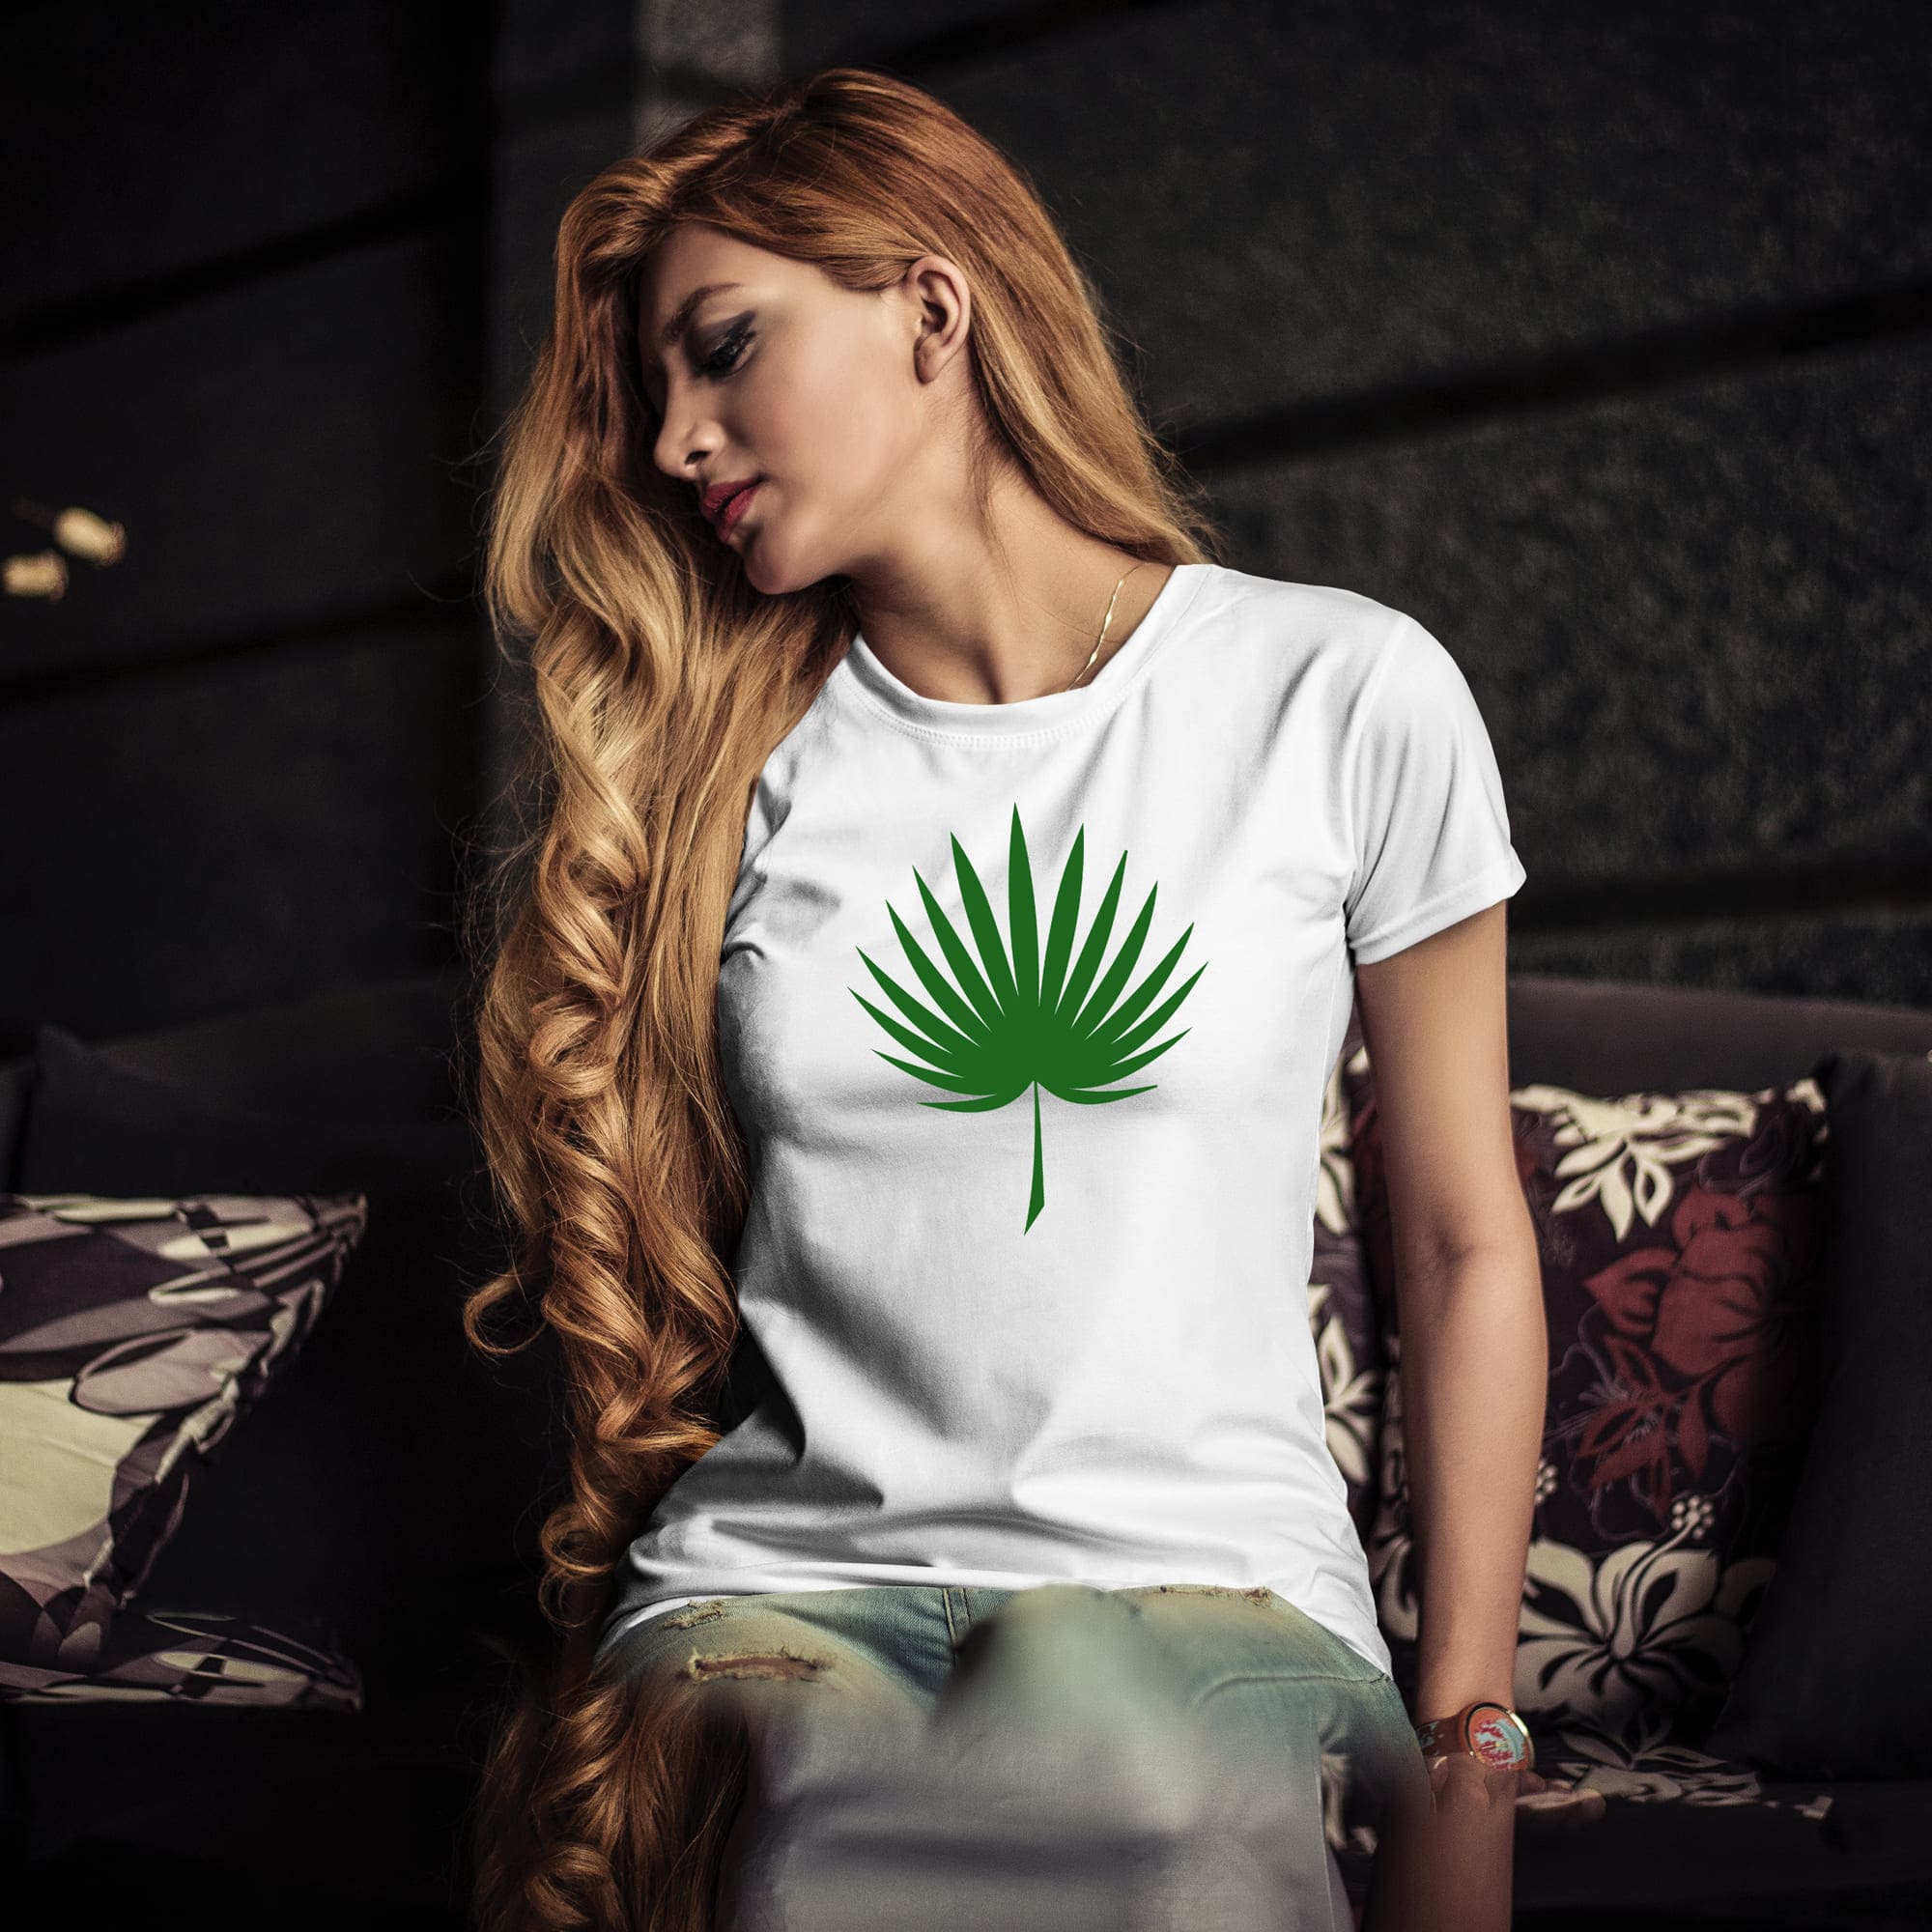 Large palm leaf painted on a woman's white t-shirt.